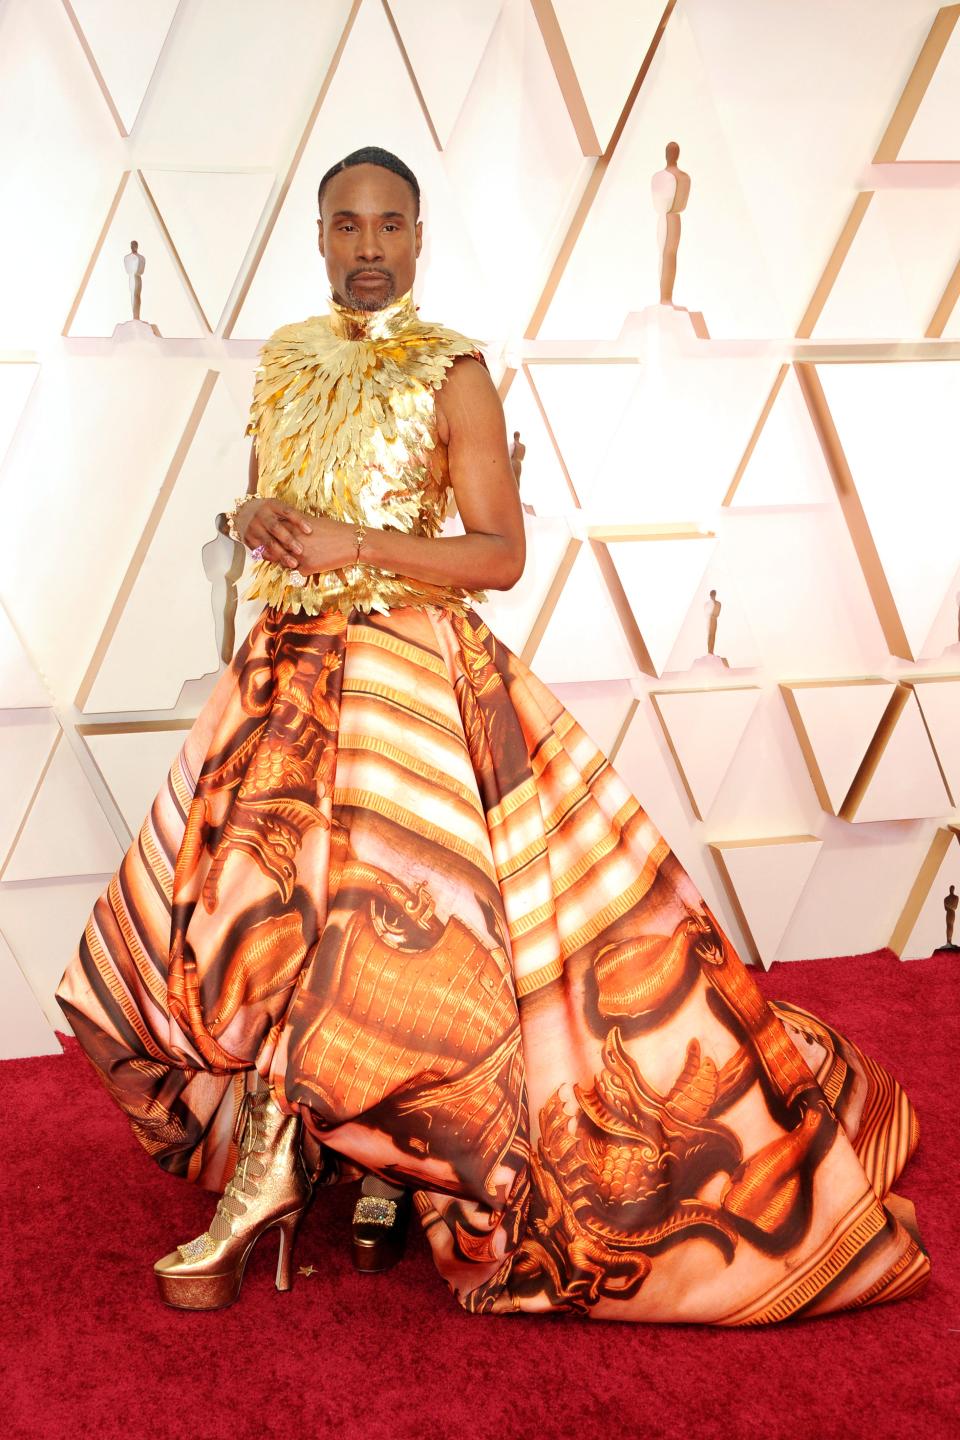 Billy Porter at the 2020 Oscars in gold and orange dress